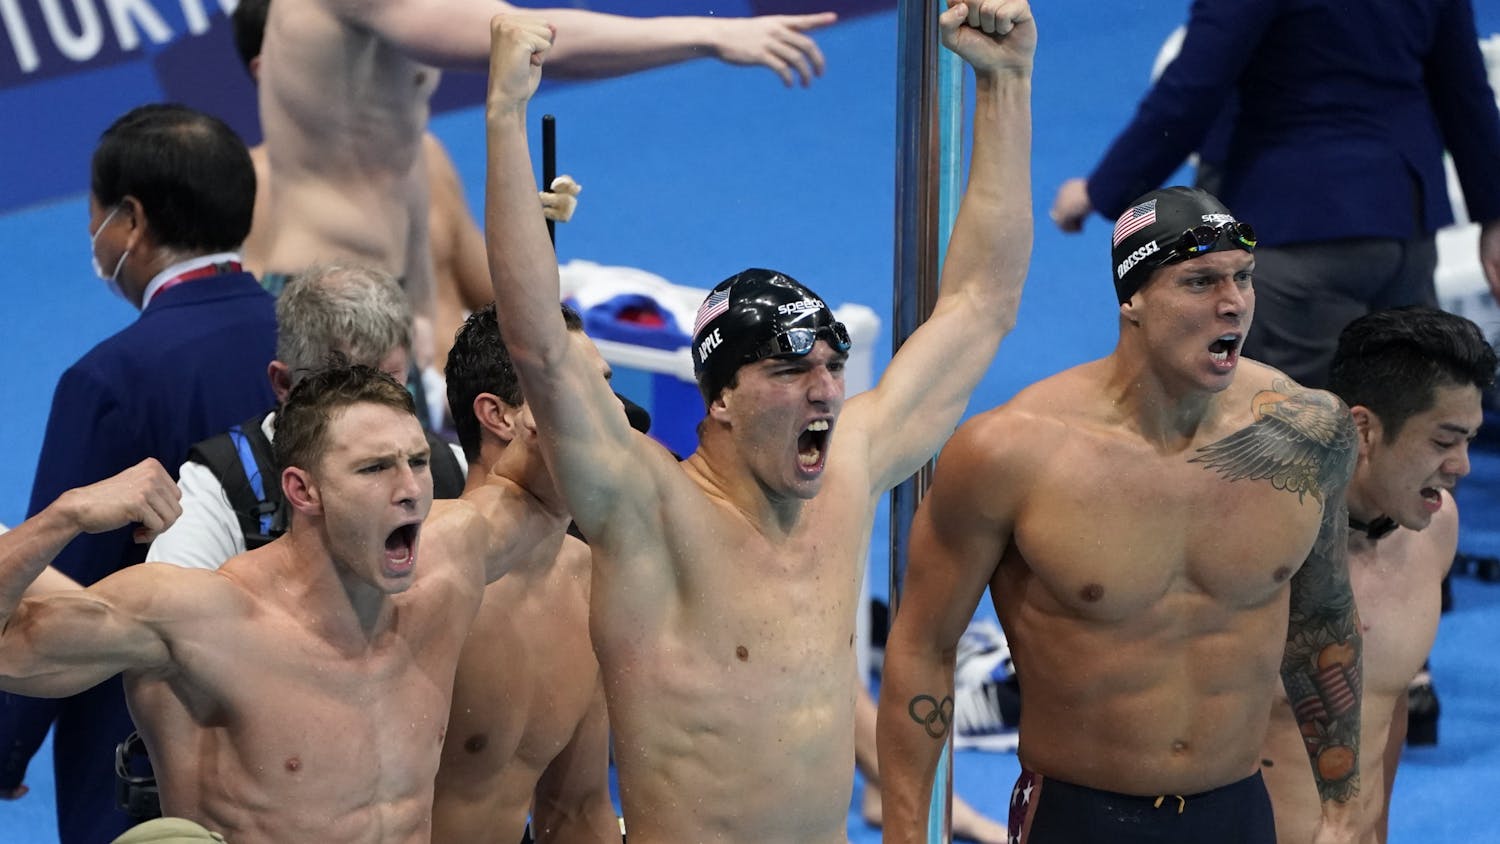 Caeleb Dressel, of United States, right, and teammates celebrate winning the gold medal in the men's 4x100-meter medley relay final at the 2020 Summer Olympics, Sunday, Aug. 1, 2021, in Tokyo, Japan. (AP Photo/Jae C. Hong)